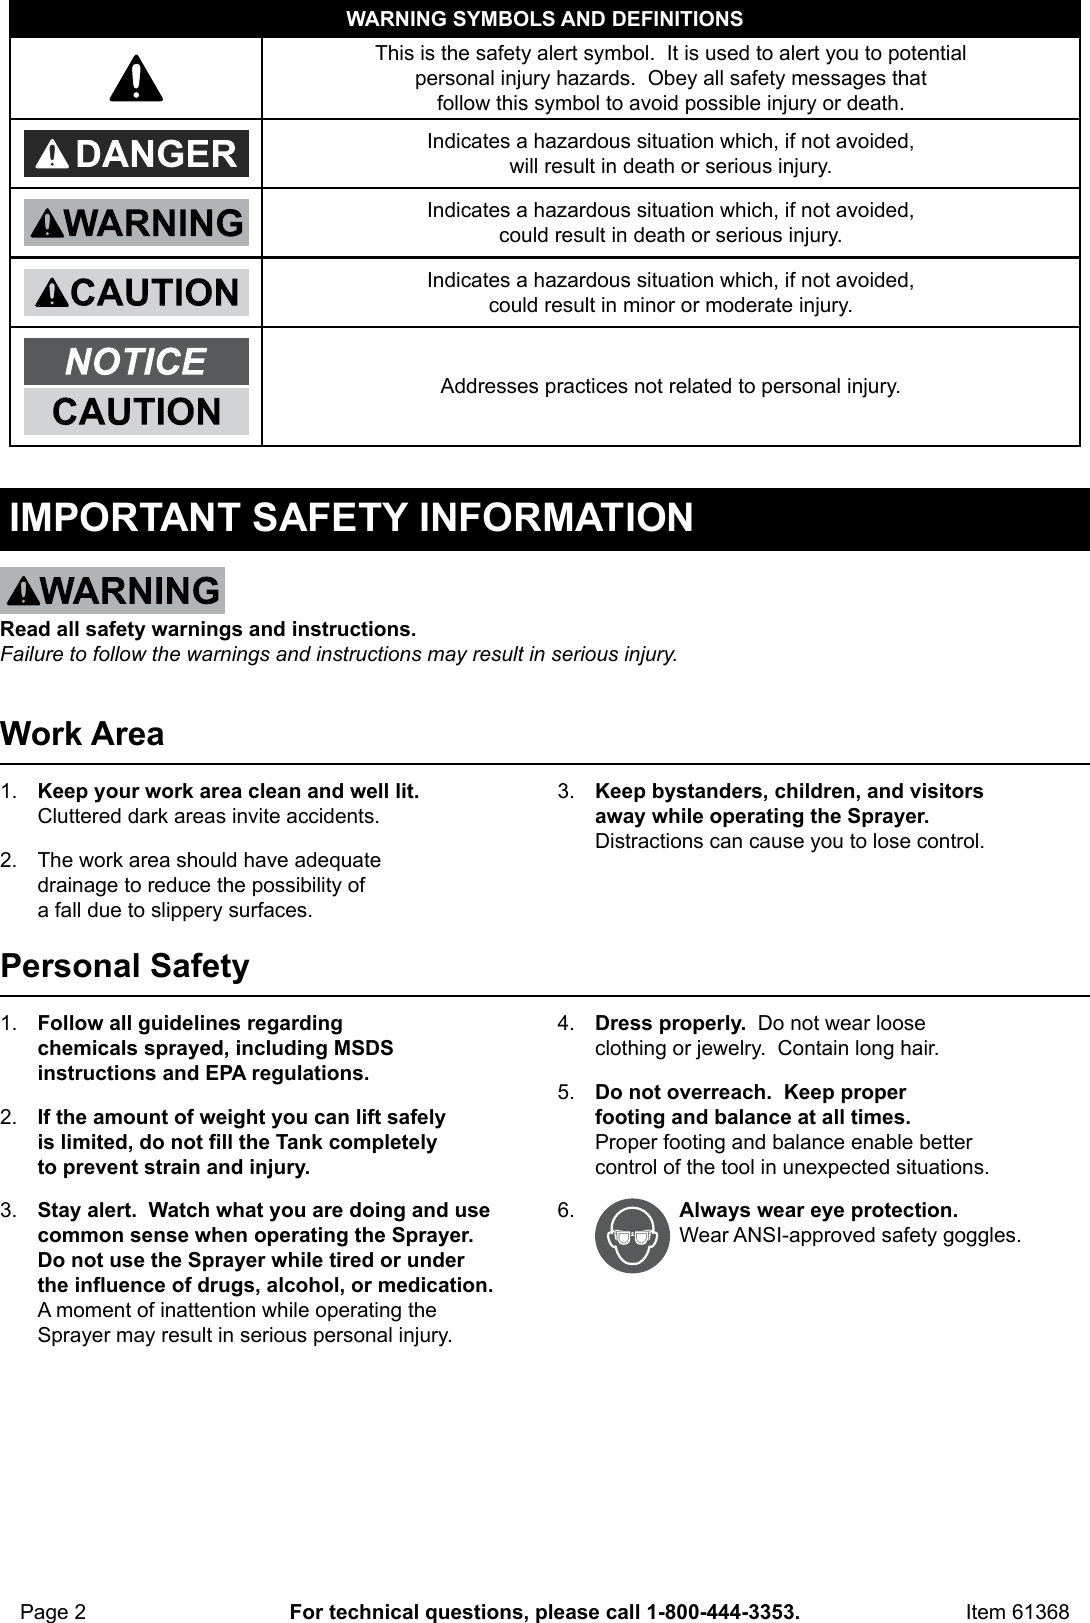 Page 2 of 12 - Harbor-Freight Harbor-Freight-4-Gal-Backpack-Sprayer-Product-Manual-  Harbor-freight-4-gal-backpack-sprayer-product-manual